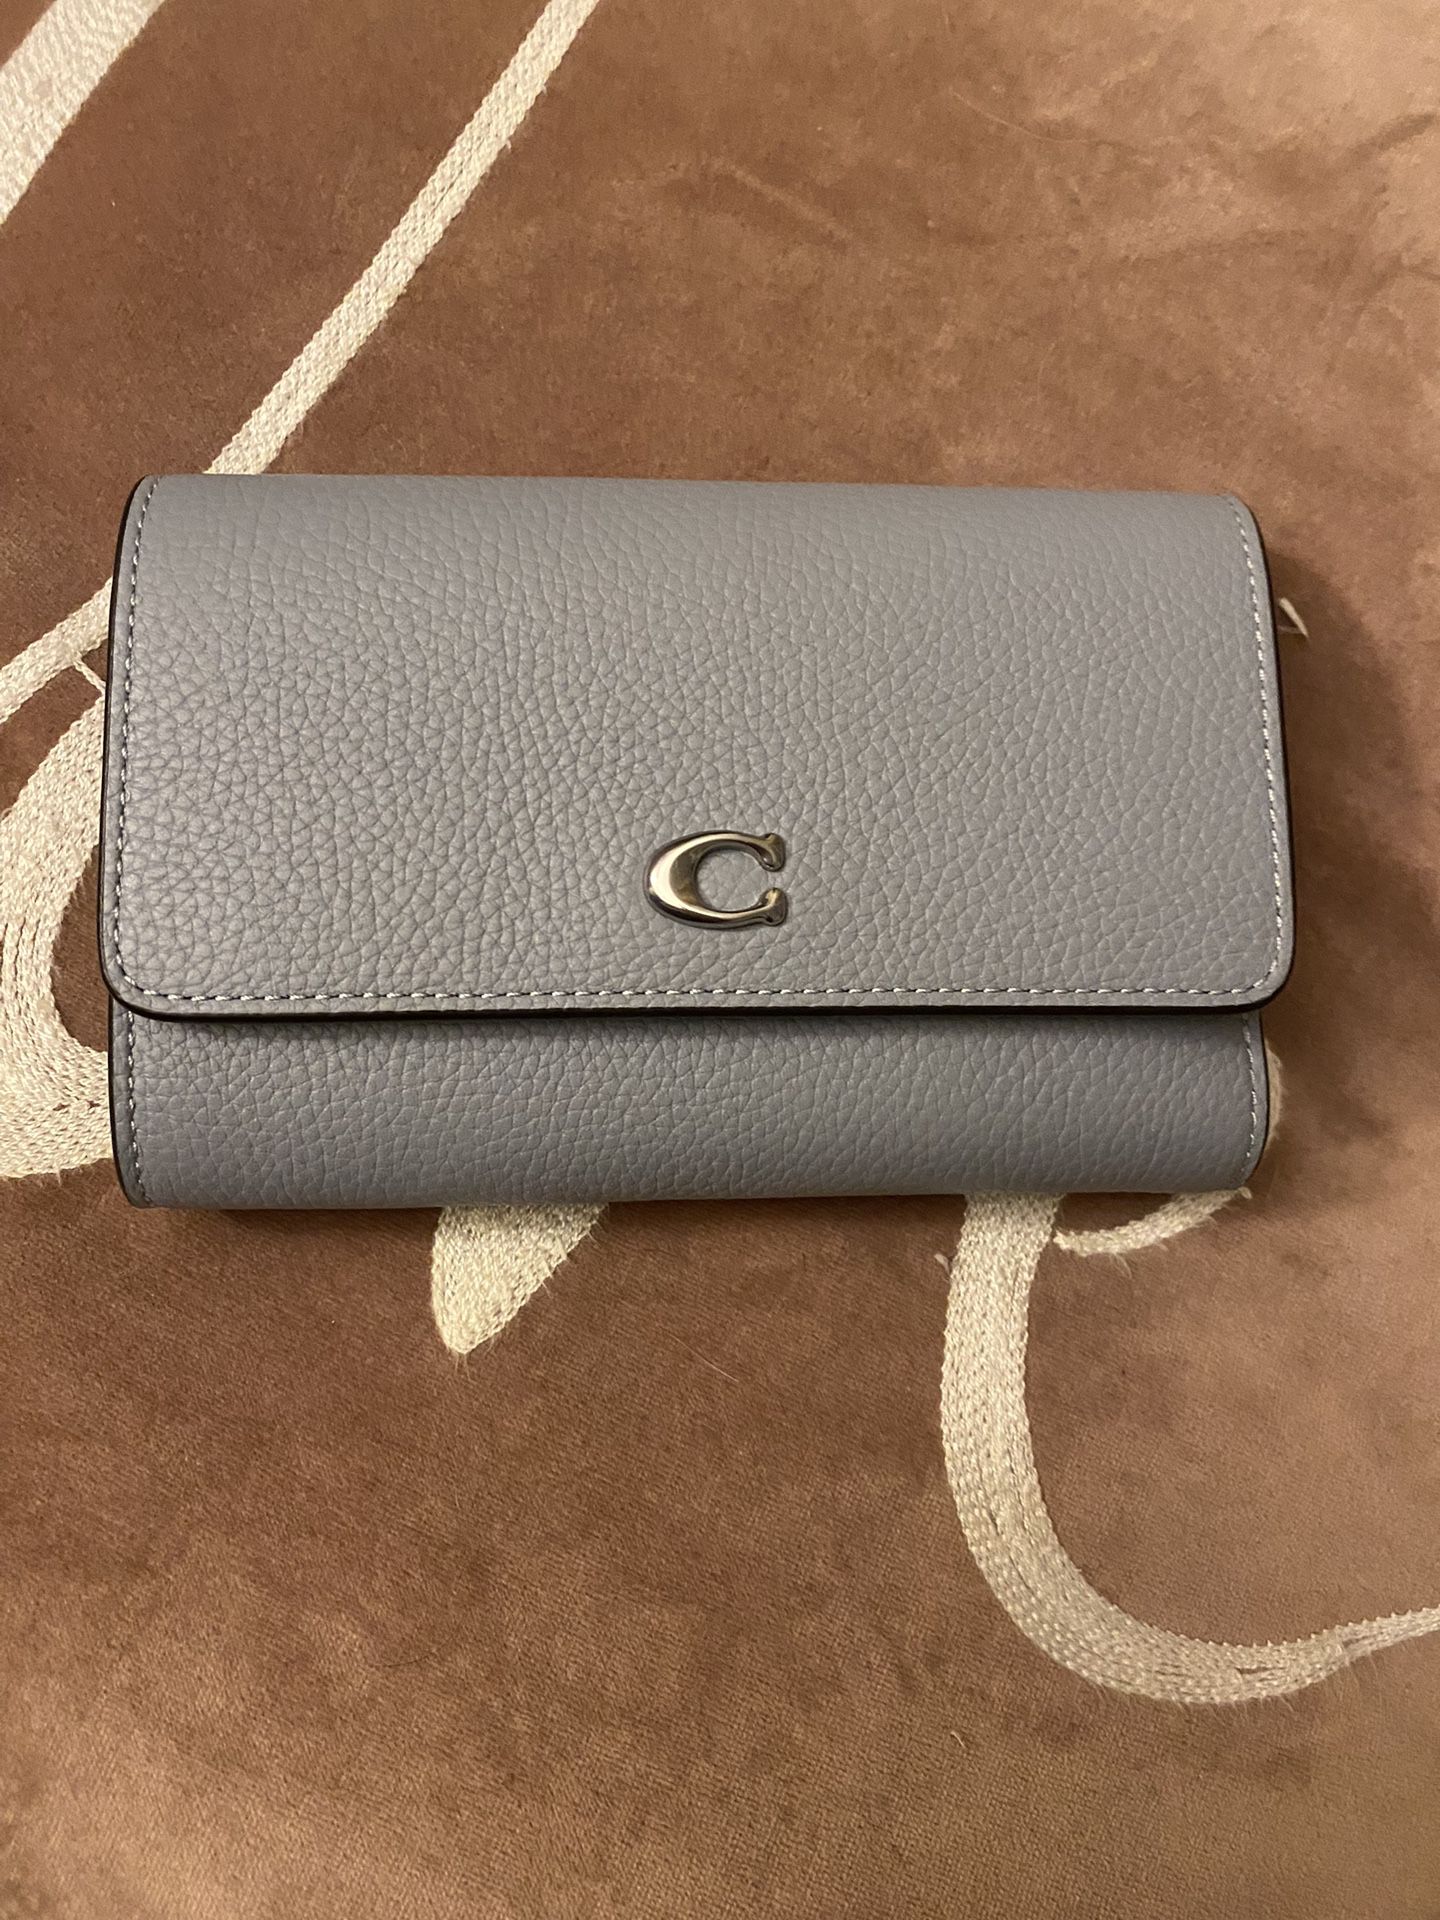 Beautiful Brand New Authentic Coach Wallet